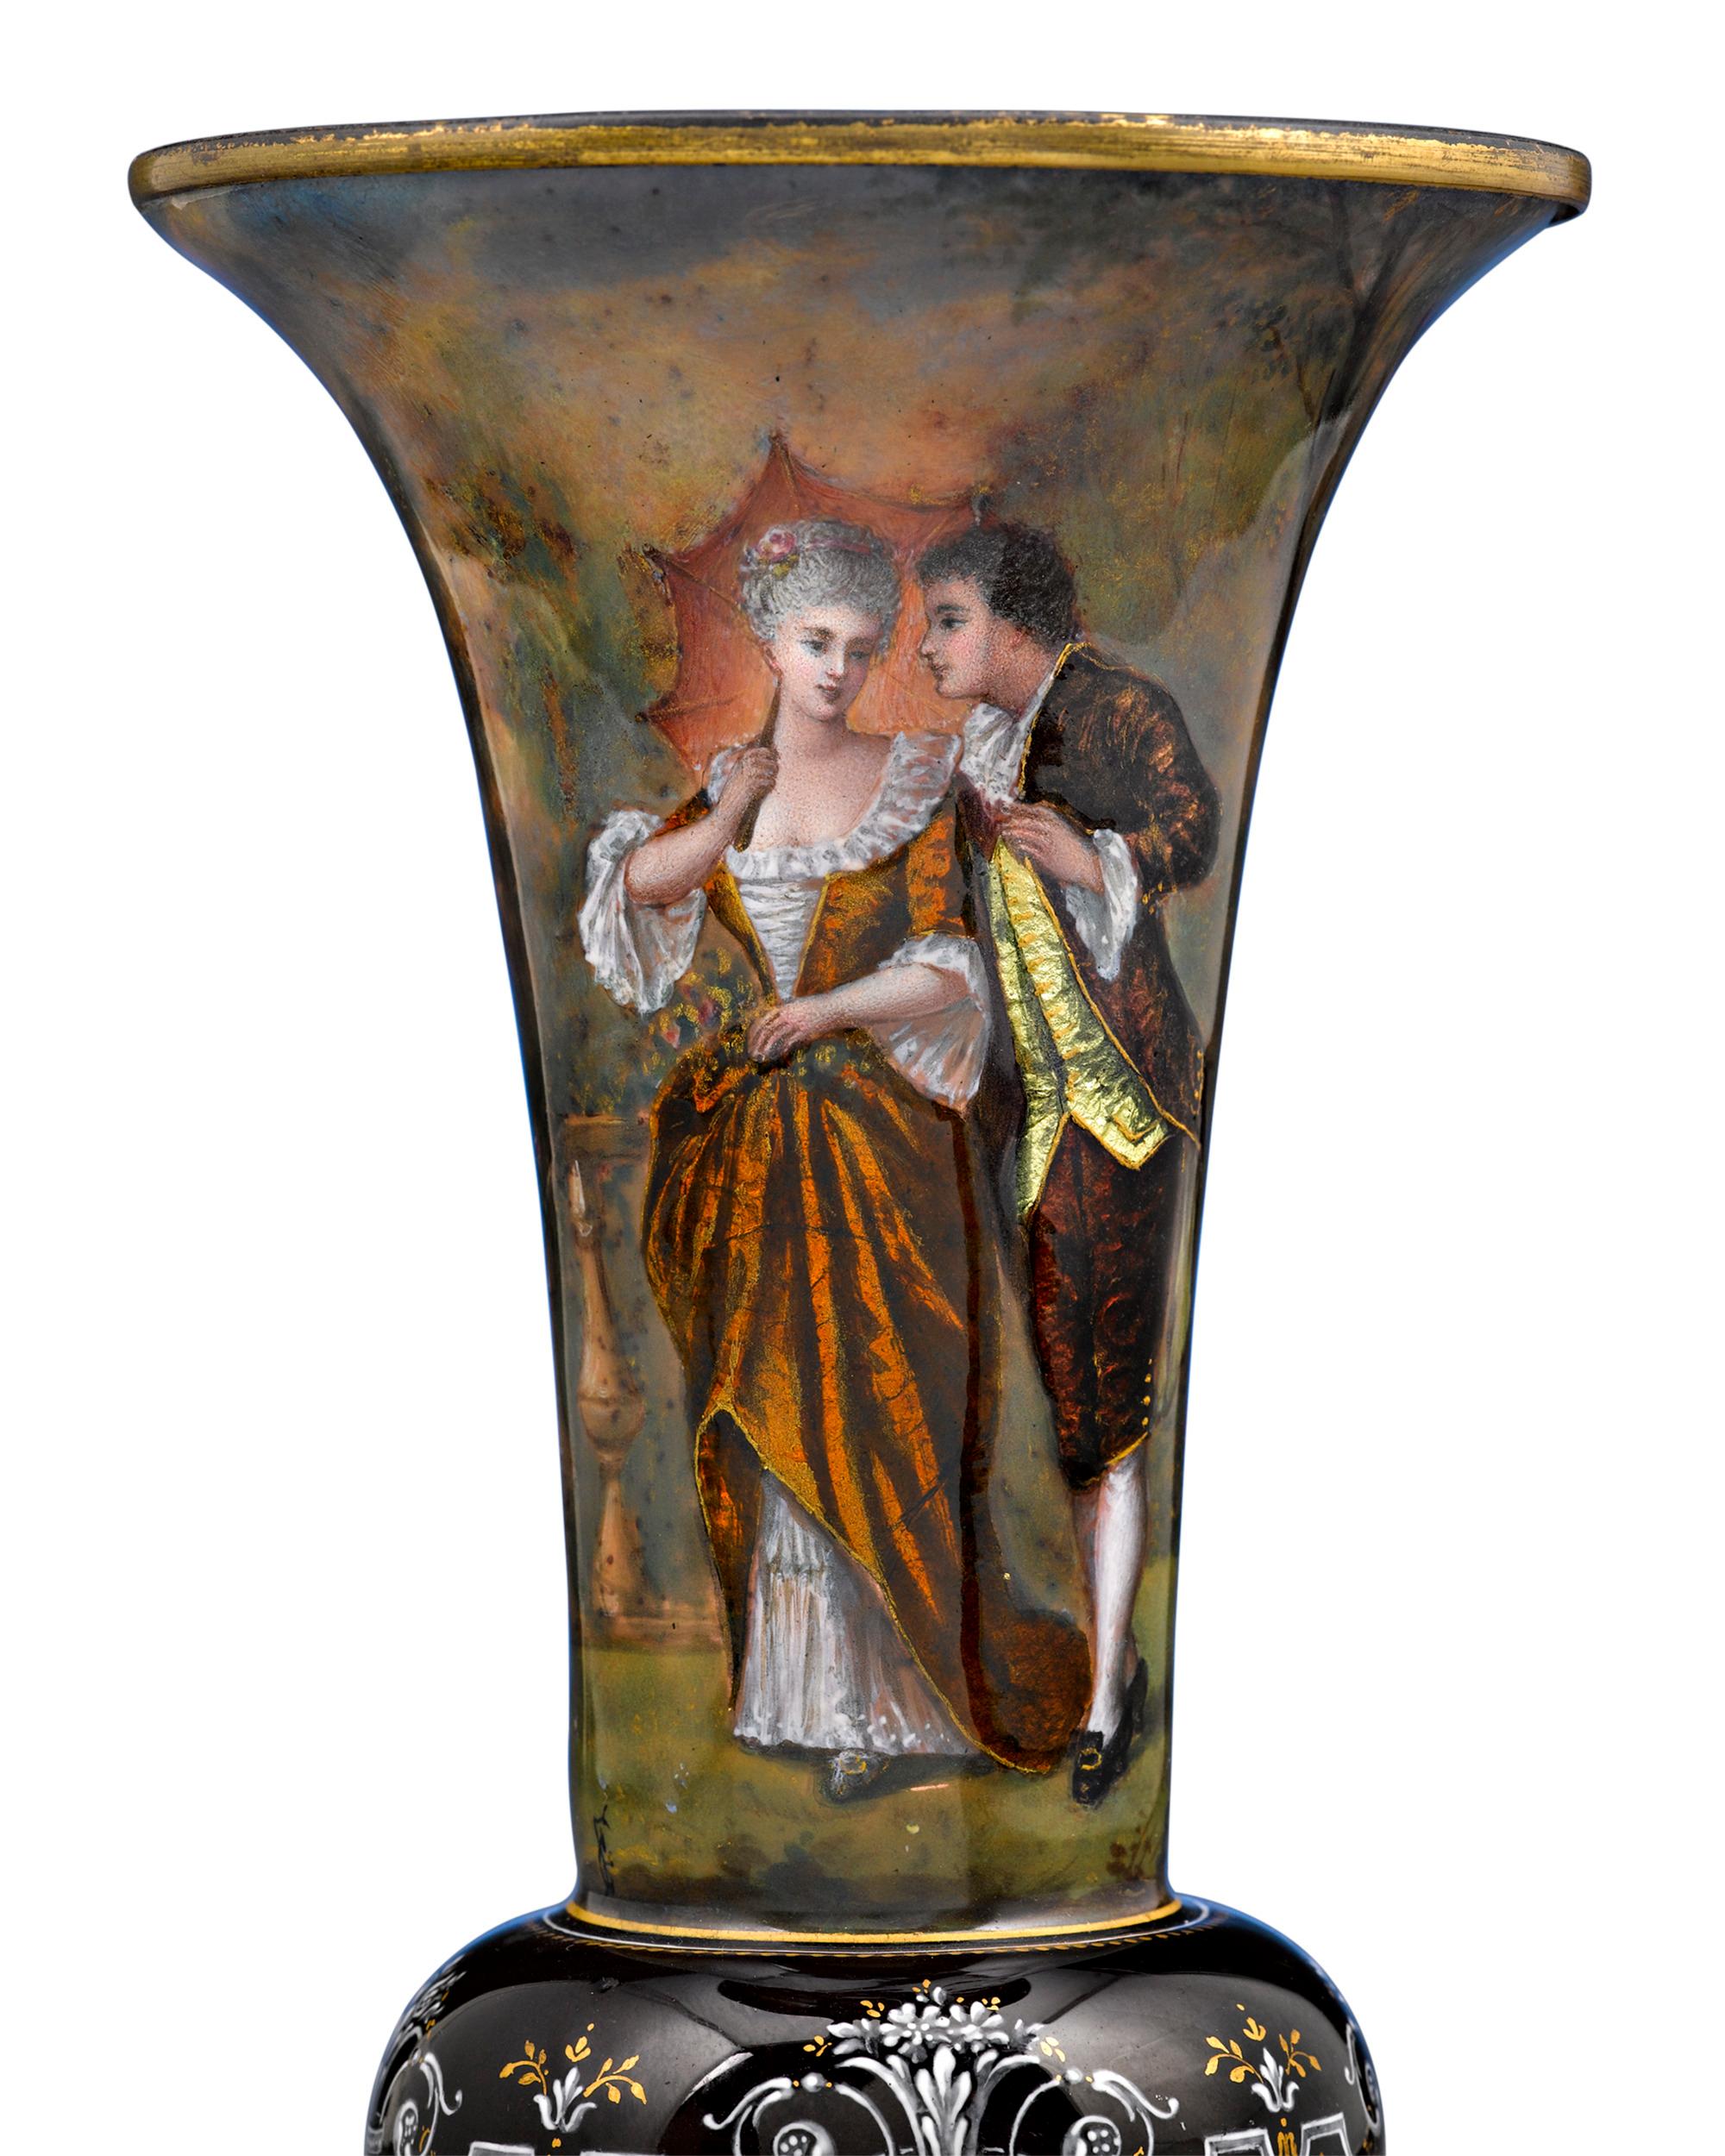 A gorgeous pair of Limoges enamel vases featuring romantic scenes of 18th century lovers in vividly colored dress. It is especially rare to find pairs of these wonderful vases in such pristine condition,

circa 1870.

Size: 7 3/4